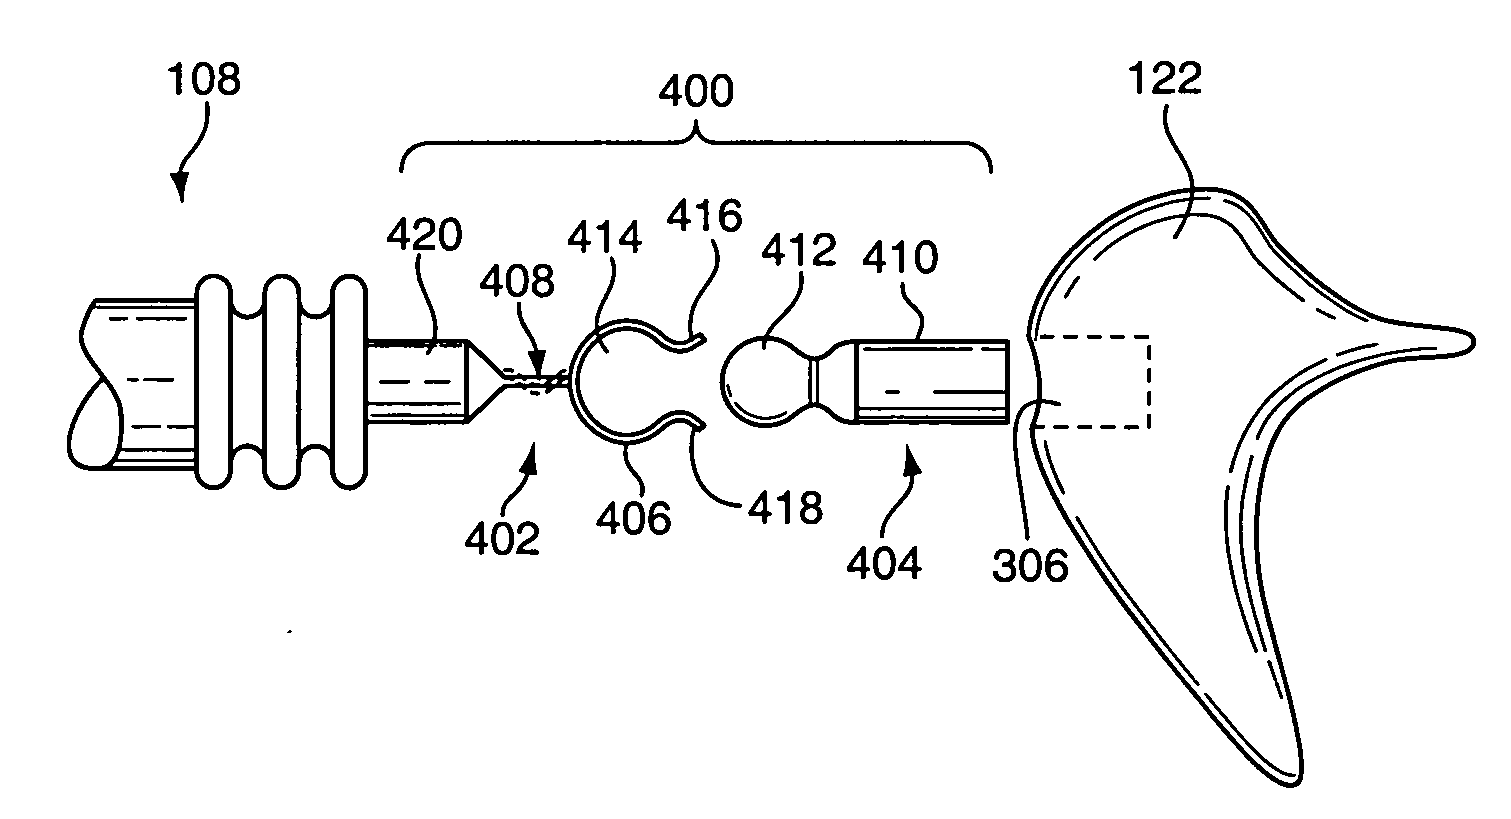 Apparatus for connection of implantable devices to the auditory system